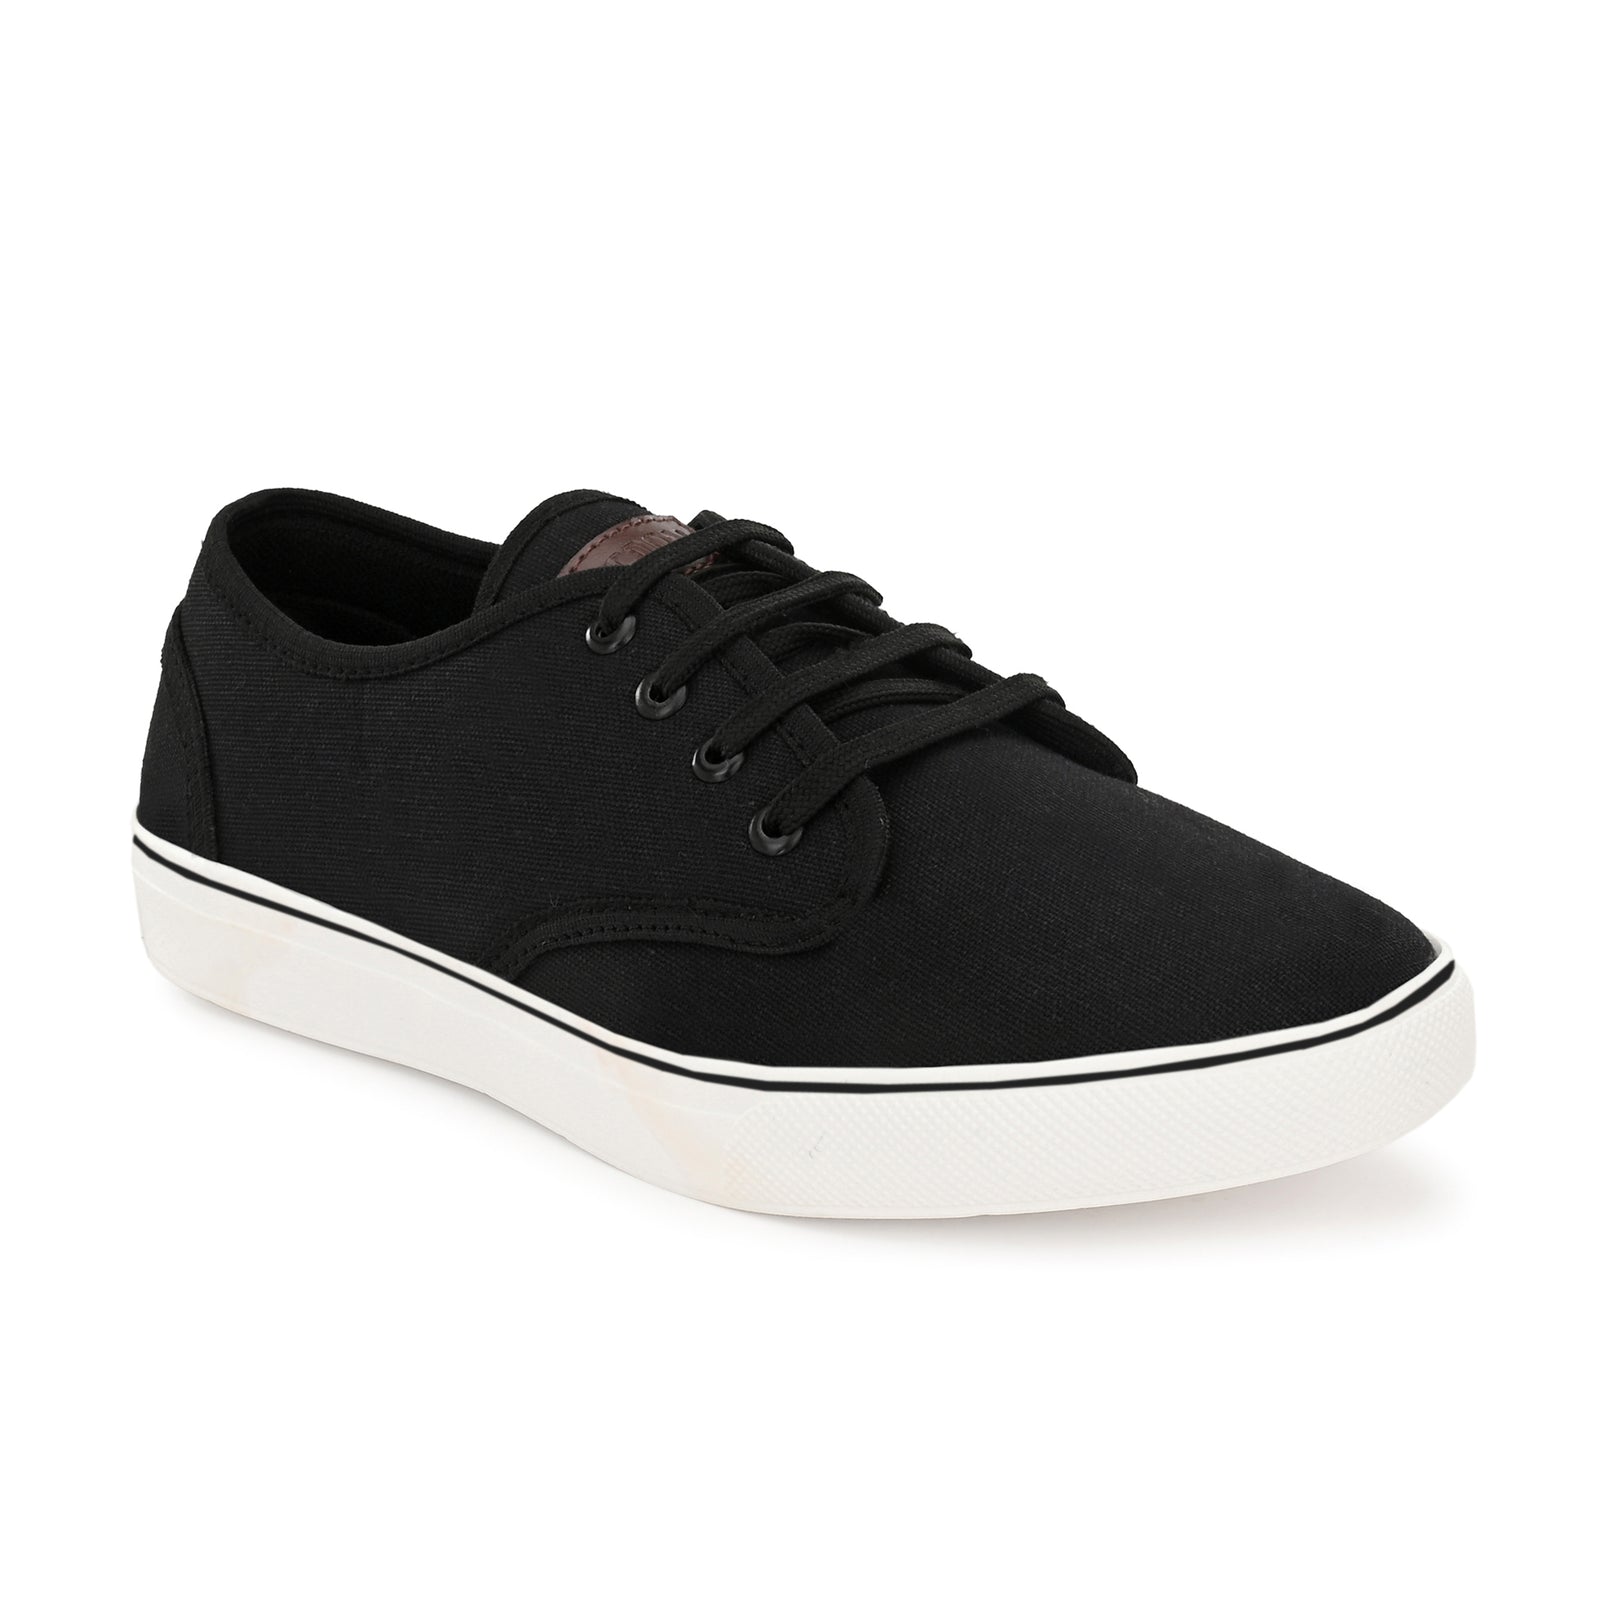 Black Solid Canvas Lace Up Lifestyle Casual Shoes For Men